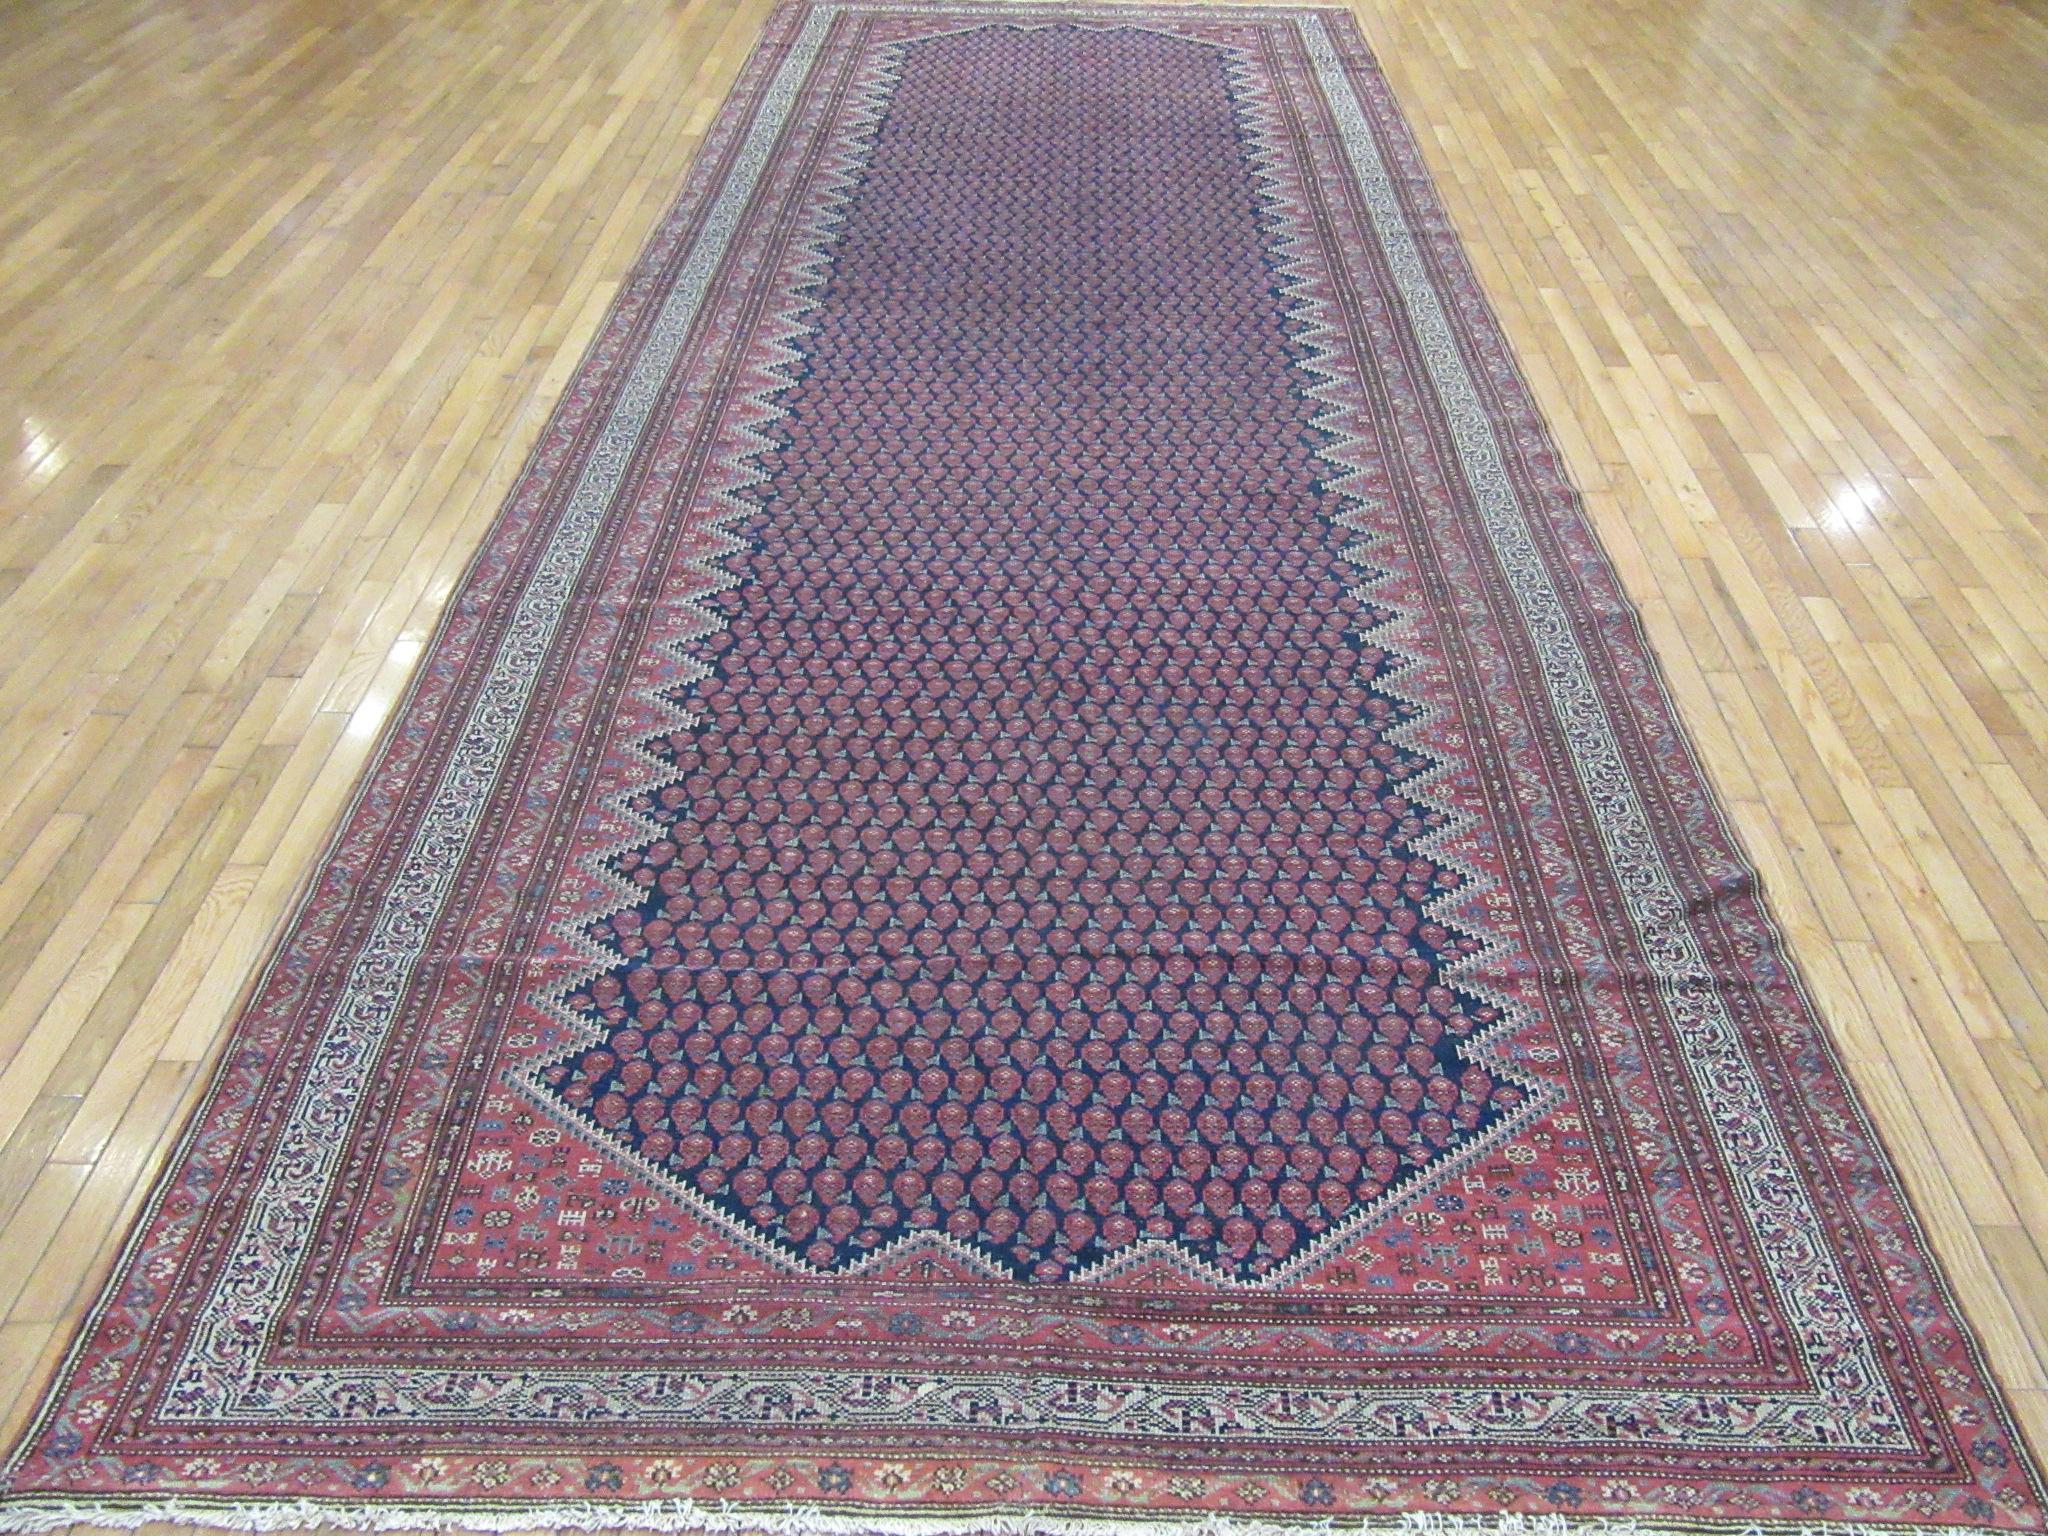 This is an antique hand knotted wool gallery size rug made with wool colored with natural dyes. It has a small scale repetitive all-over pattern on a navy blue background, The rug measures 6' 7'' x 26' 8''
circa 1900.